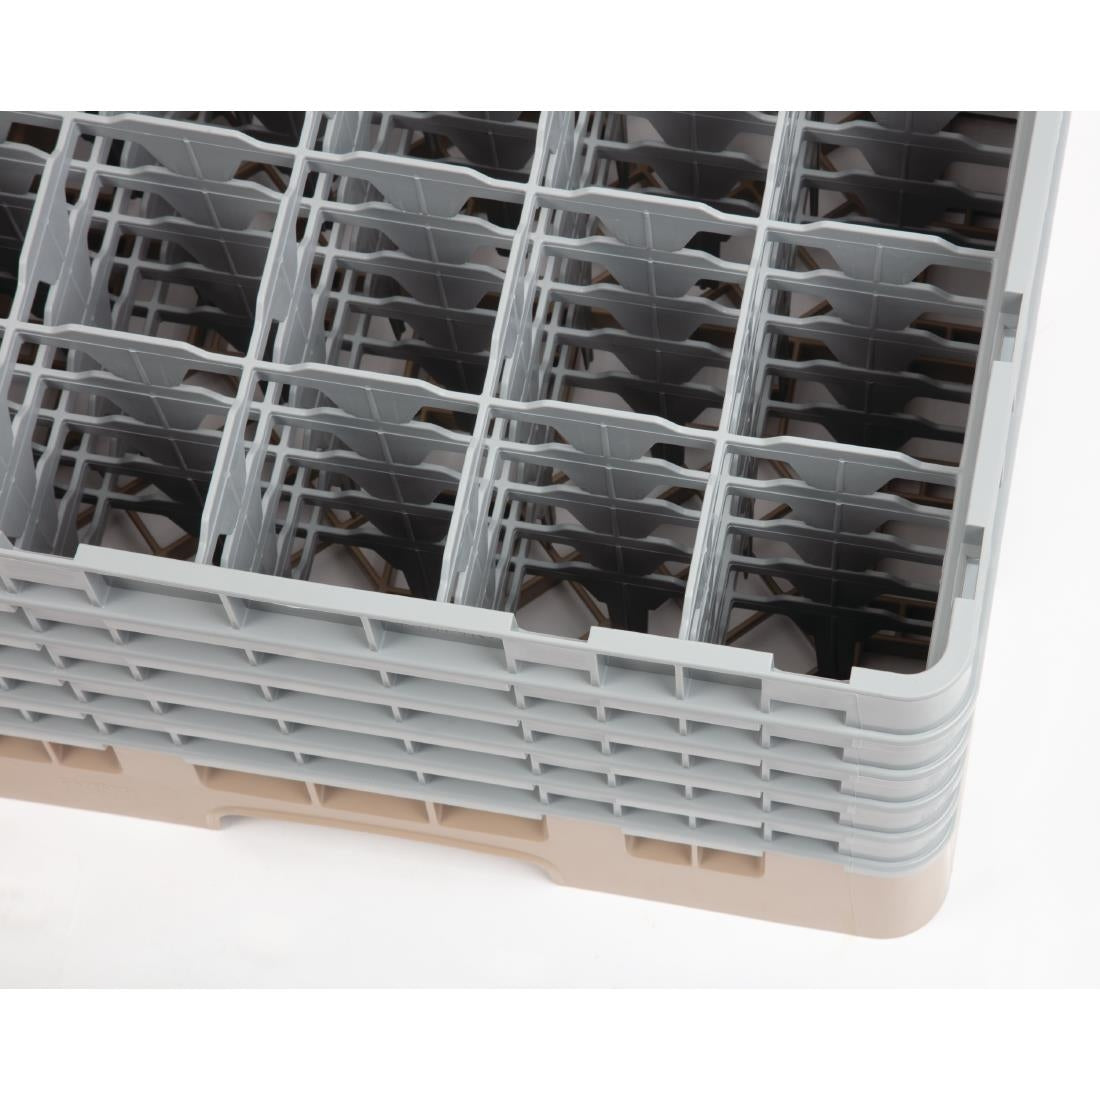 Cambro Camrack Beige 25 Compartments Max Glass Height 257mm JD Catering Equipment Solutions Ltd